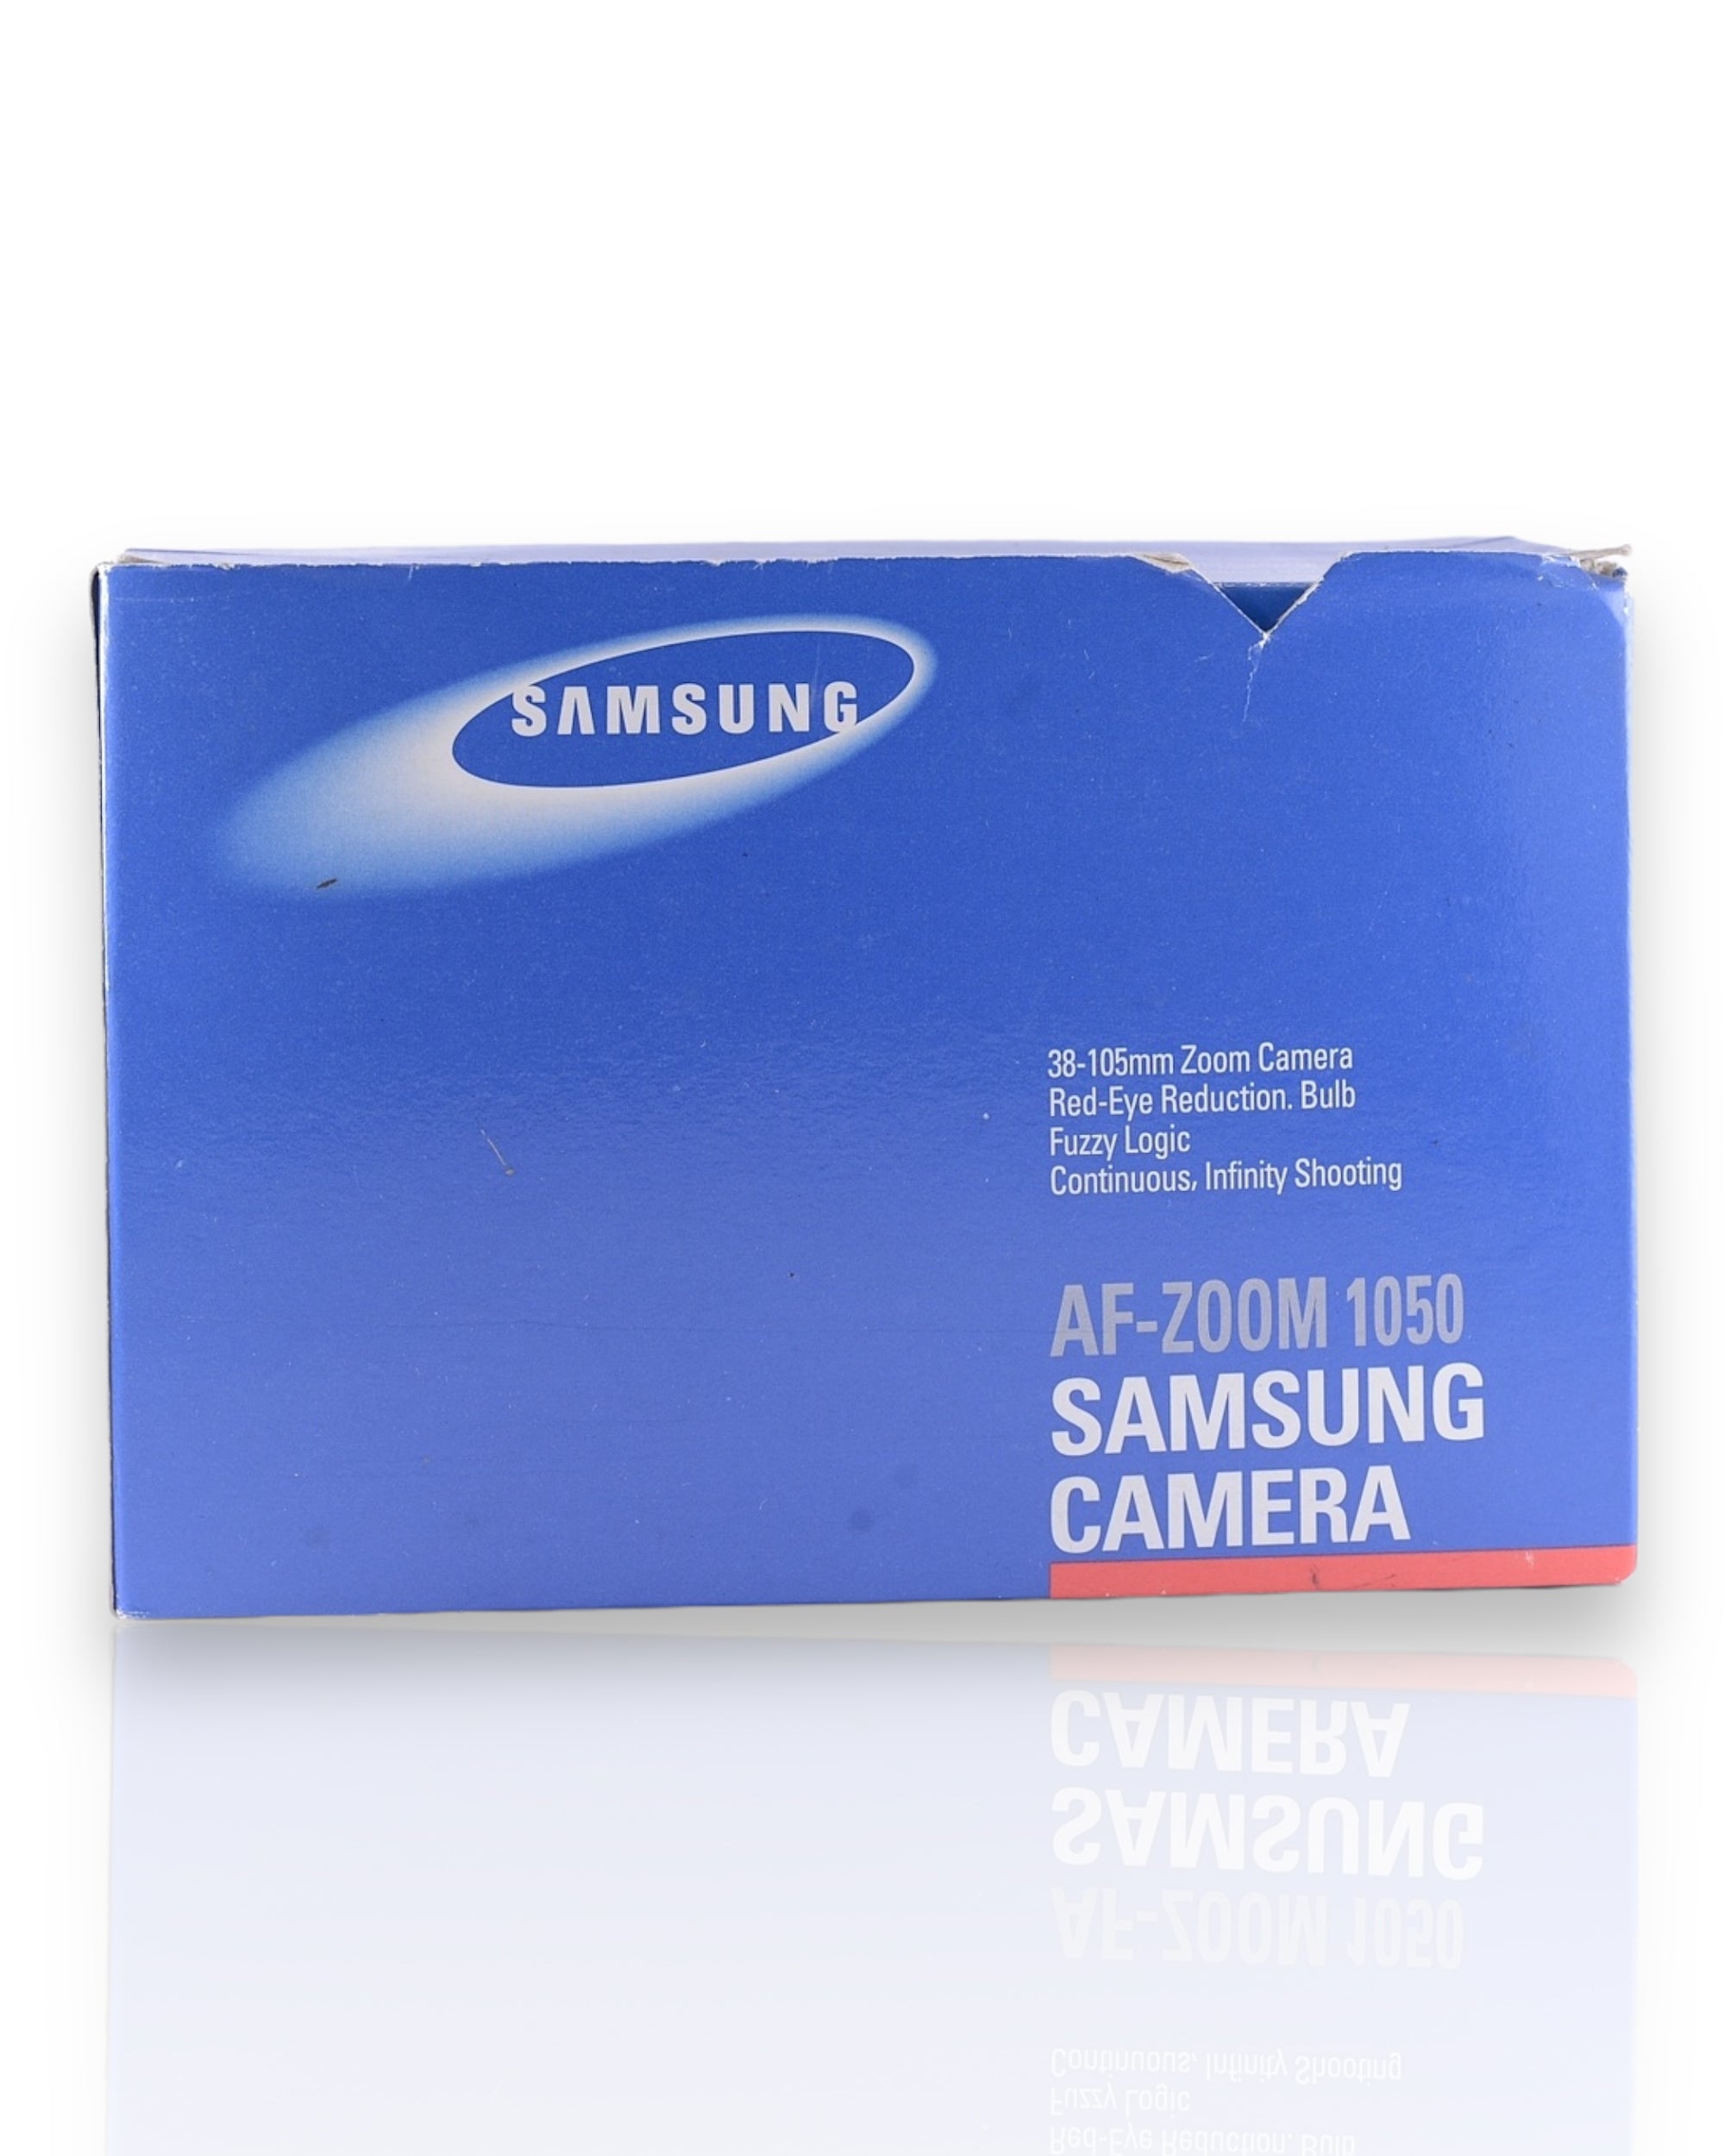 Boxed Samsung AF Zoom 1050 35mm Point & Shoot film camera with 38-105mm macro zoom lens